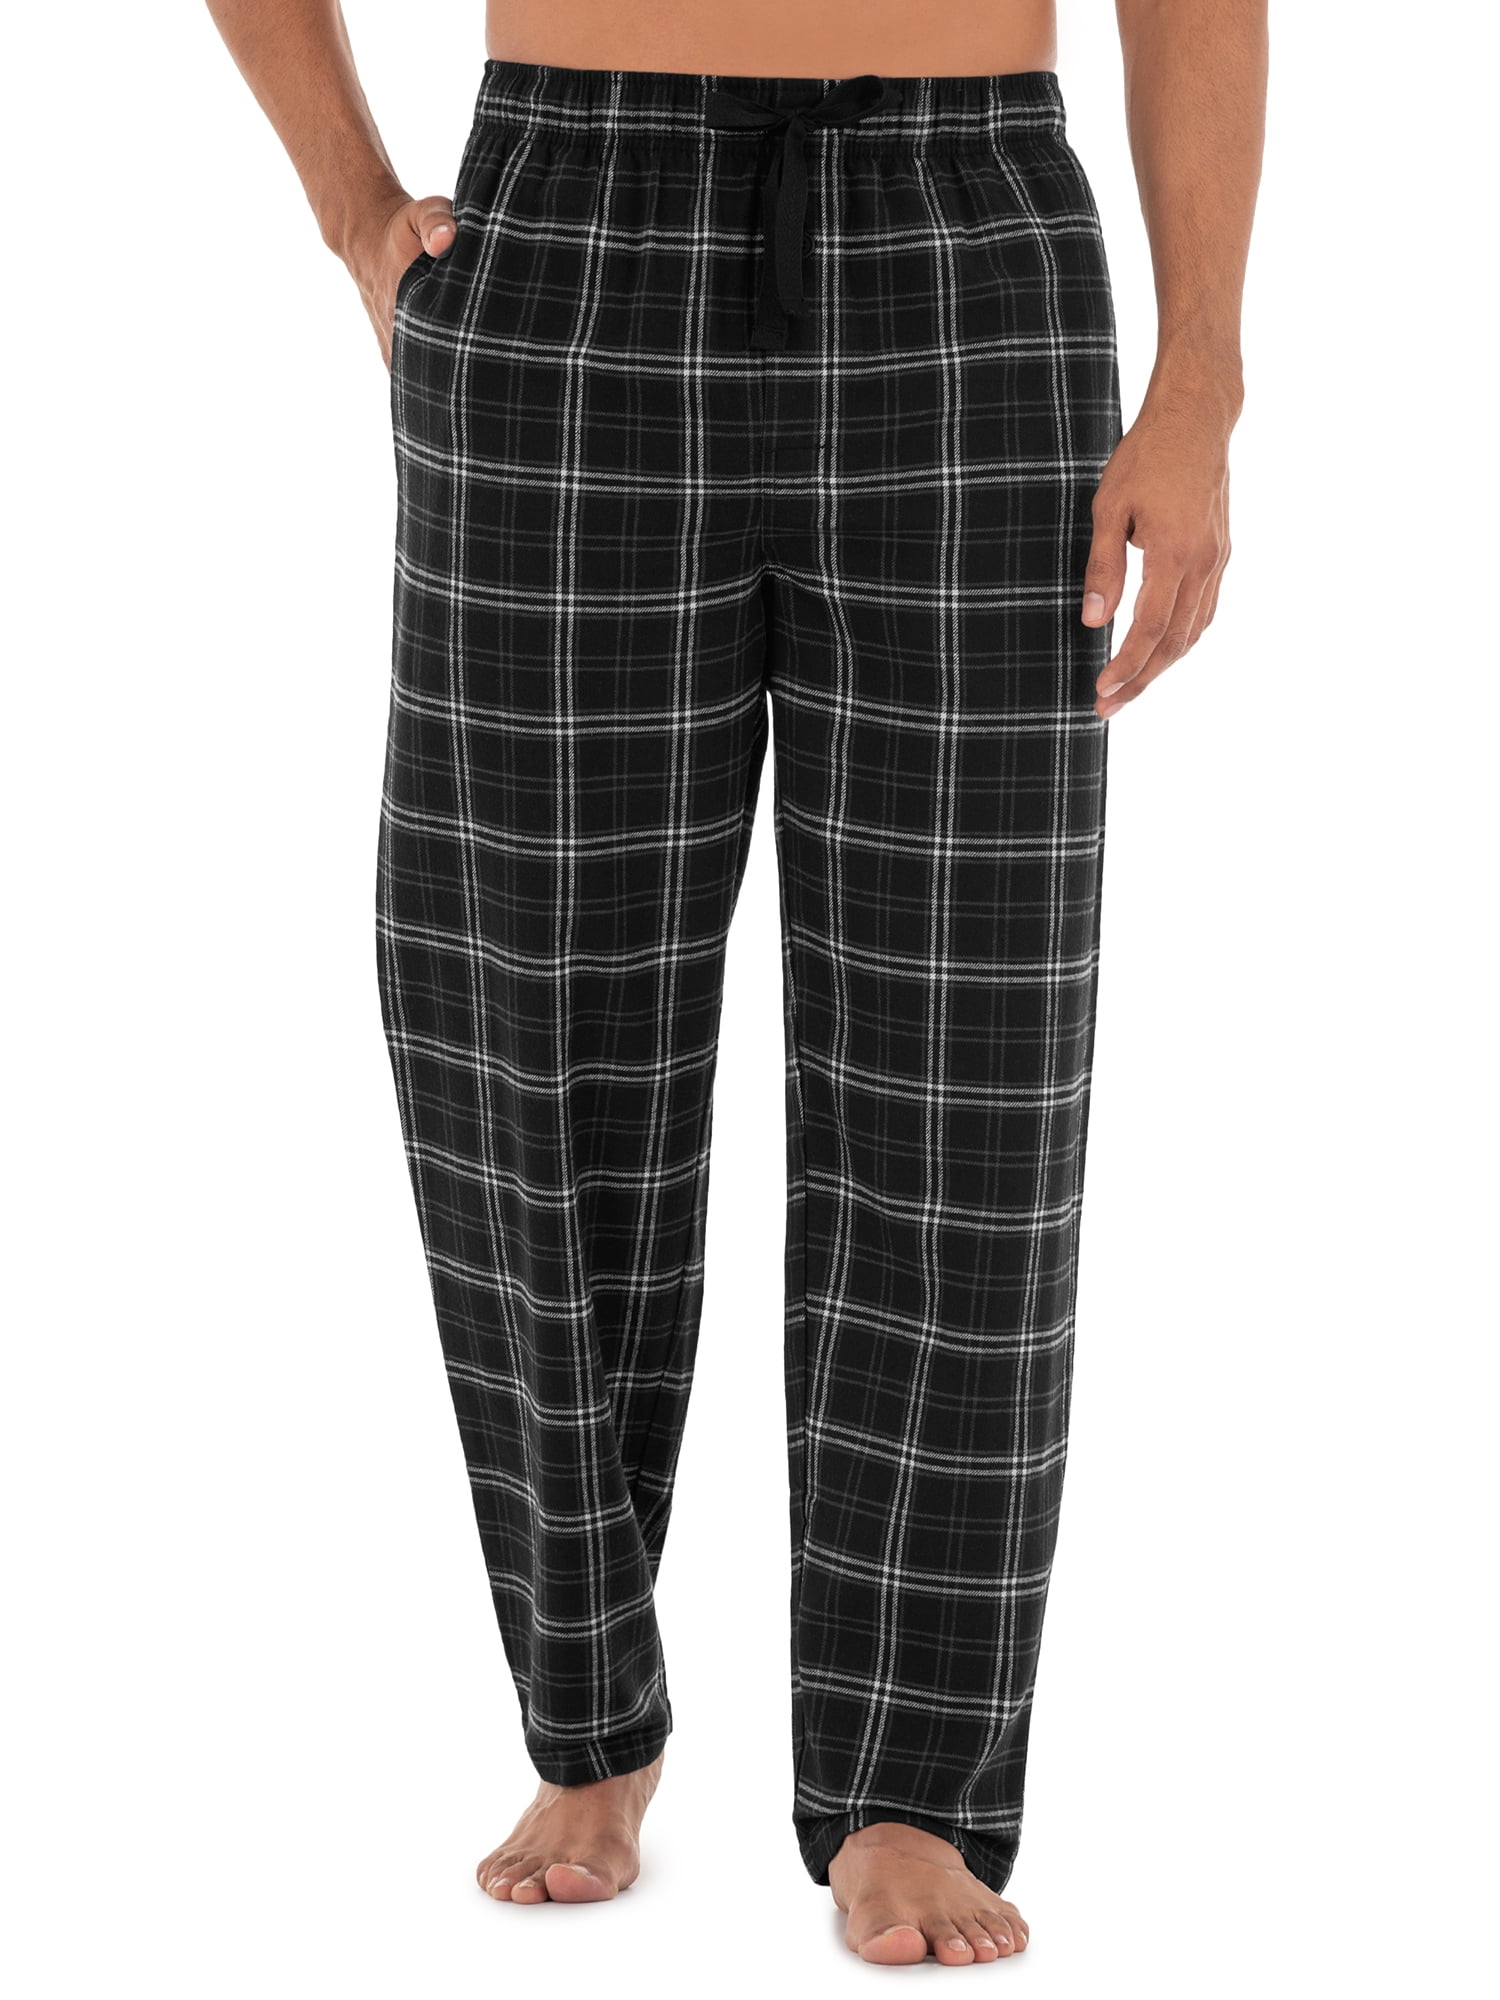 Details about   NEW MEN'S FRUIT OF THE LOOM MESH TOP & WOVEN PANT PAJAMA SET in GREY HEATHER 